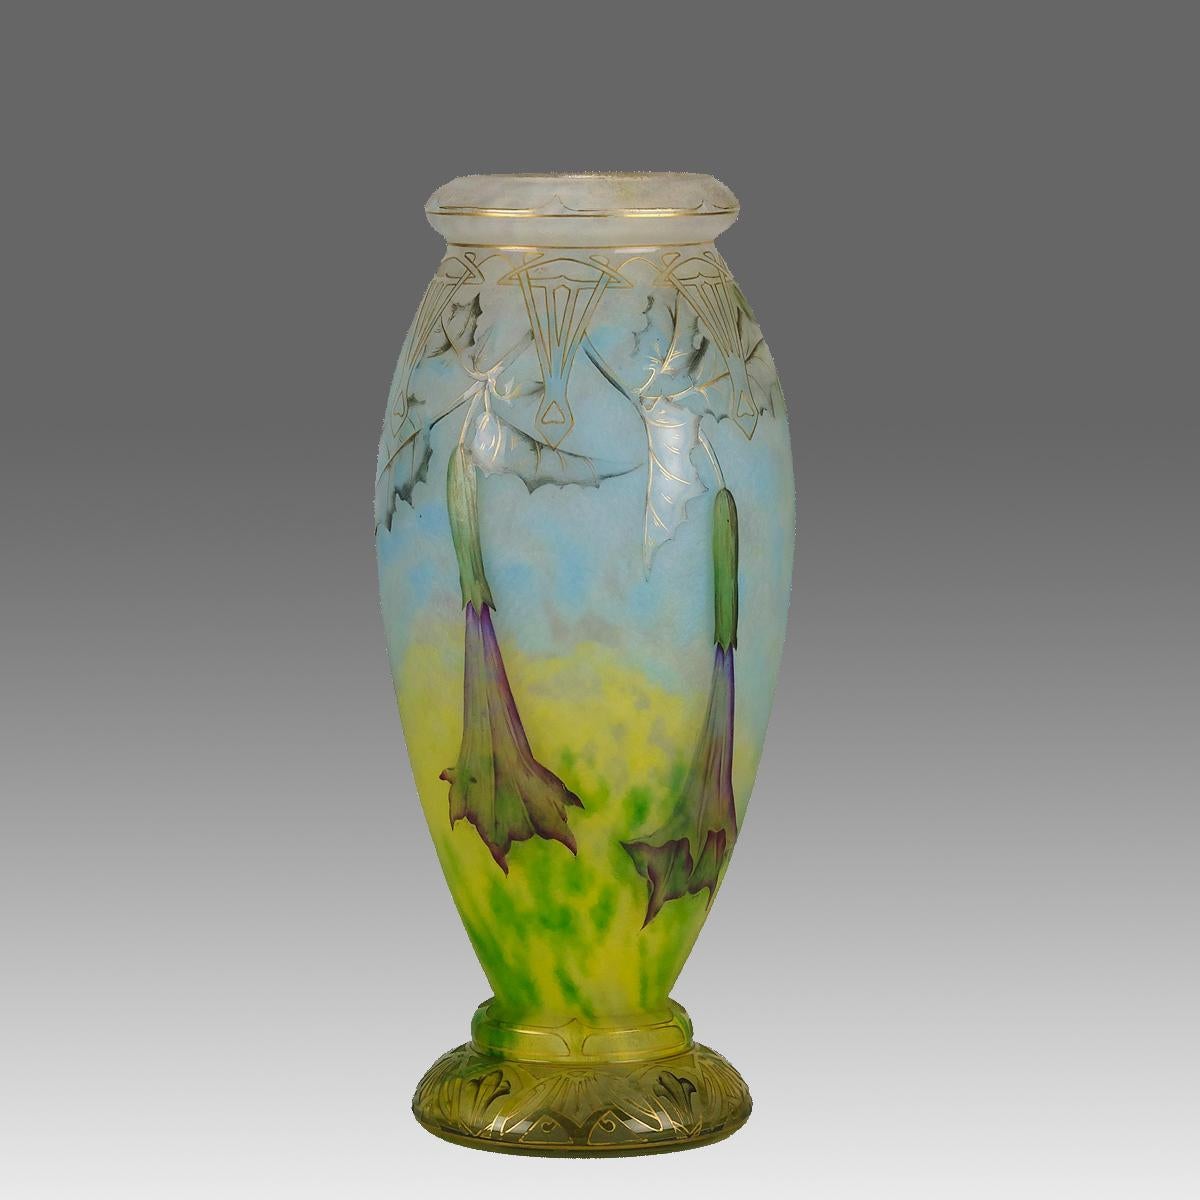 A magnificent early 20th Century Art Nouveau cameo glass vase etched and enamelled with flowering Datura in a vibrant landscape. The design heightened with gilded design on the surface to give a dramatic depth of field, exhibiting excellent colour